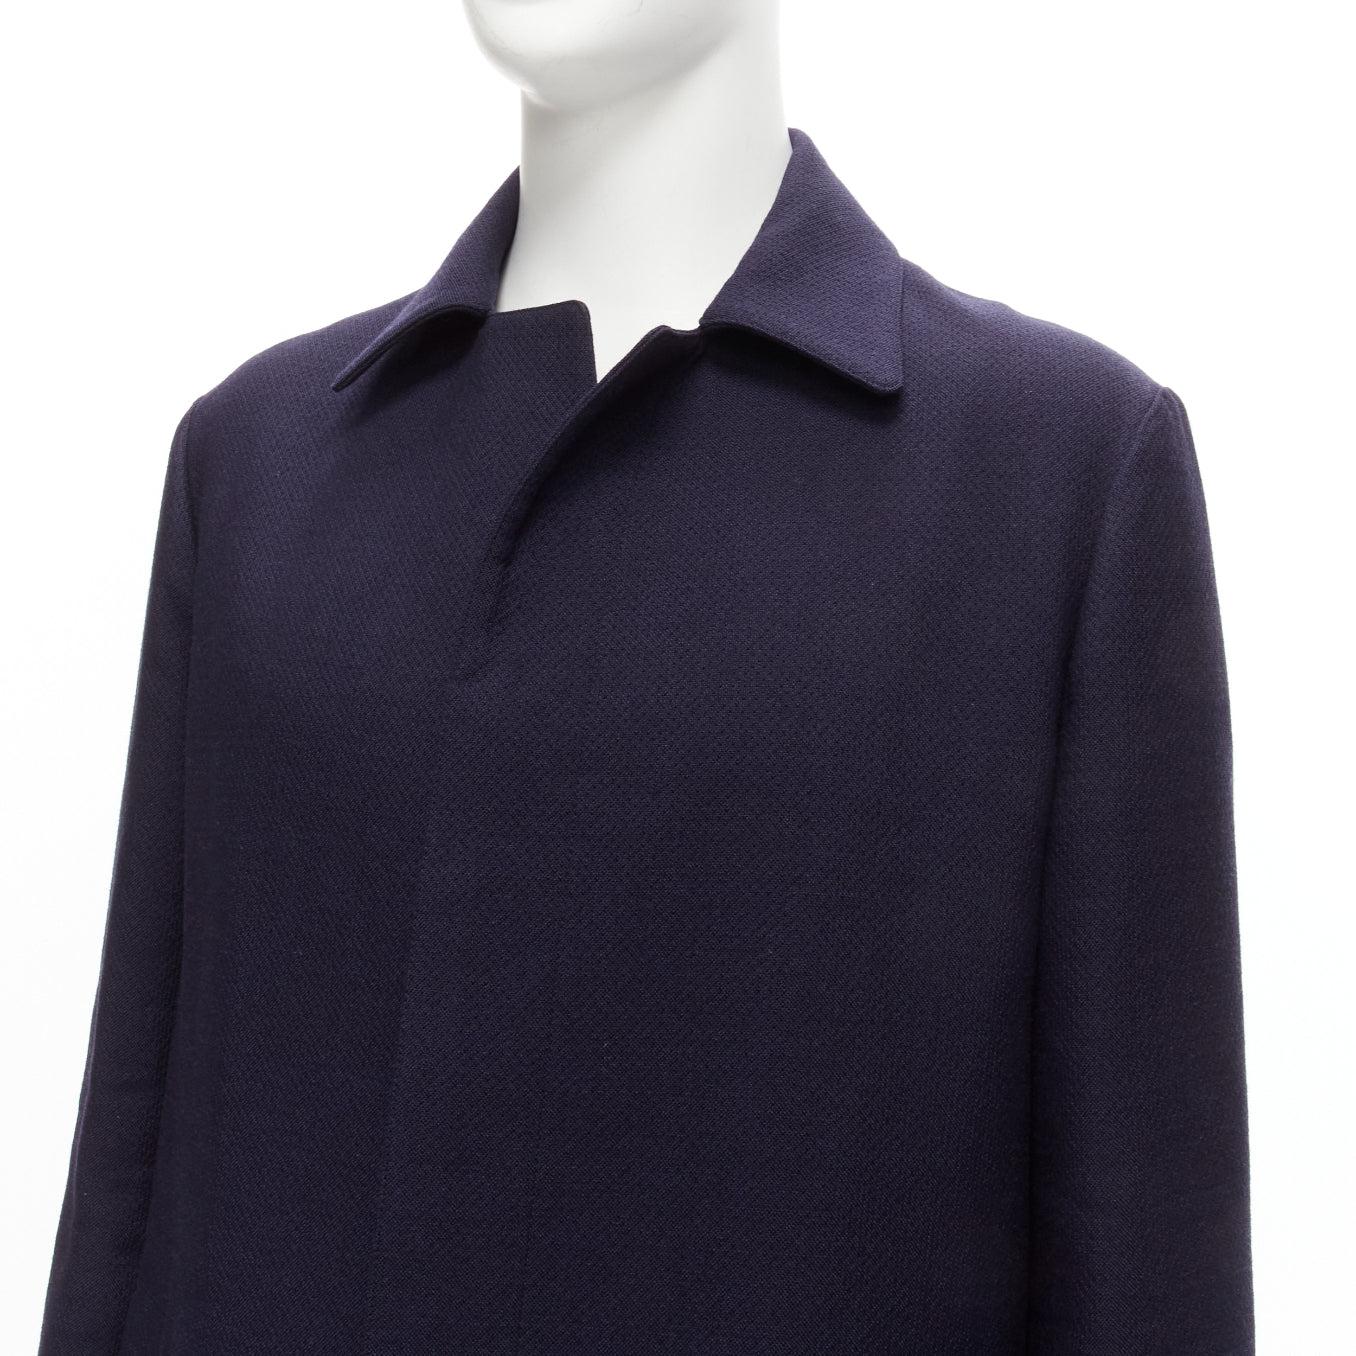 MARNI 100% wool navy blue minimal invisible button longline coat IT48 M
Reference: JSLE/A00063
Brand: Marni
Material: Wool
Color: Navy
Pattern: Solid
Closure: Button
Lining: Black Fabric
Extra Details: Invisible button stand. Single vent back. No